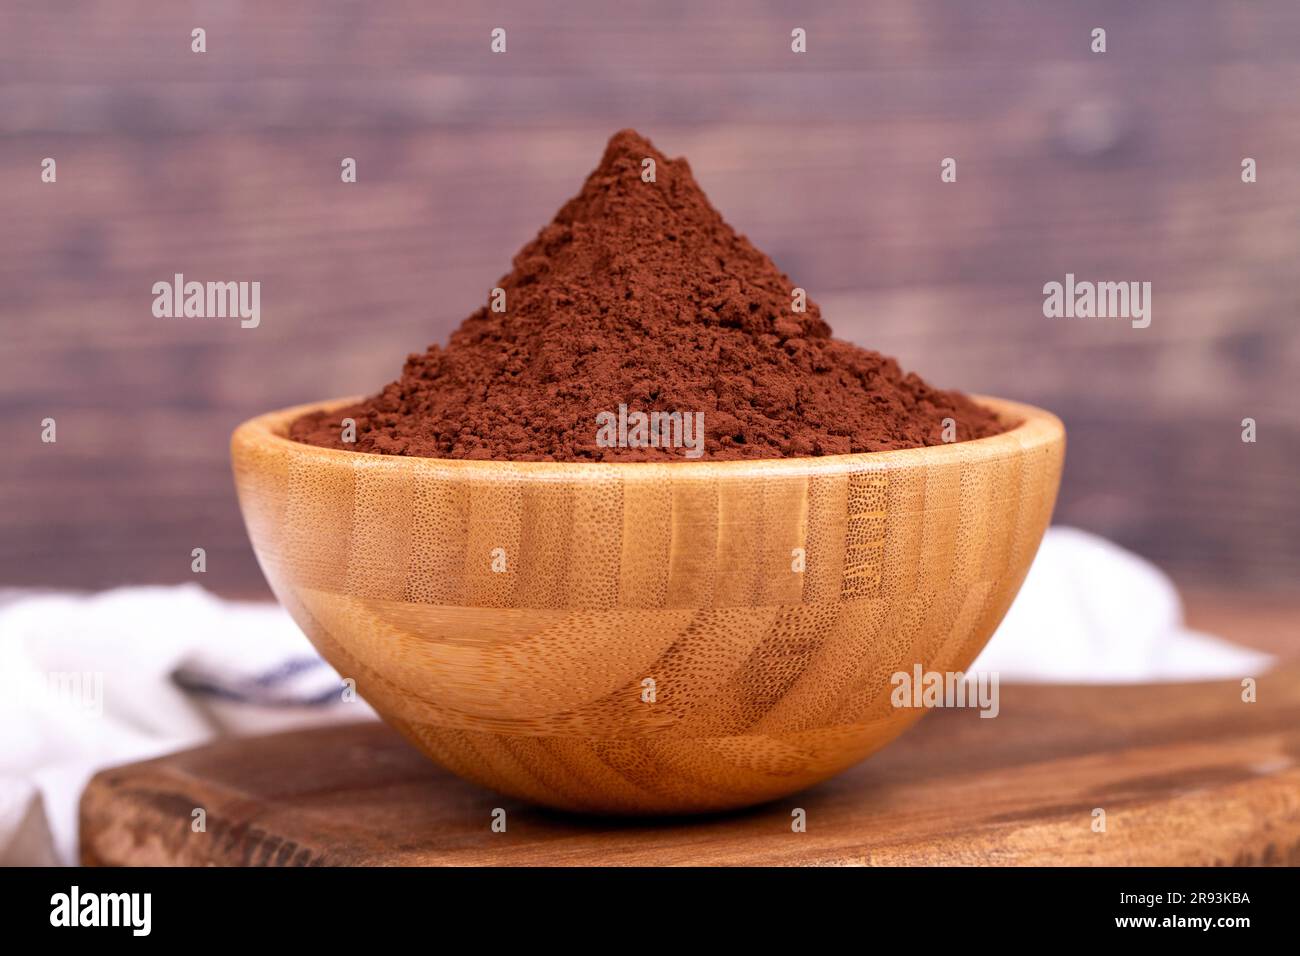 Cocoa powder on wood background. Cocoa powder in wooden bowl Stock Photo